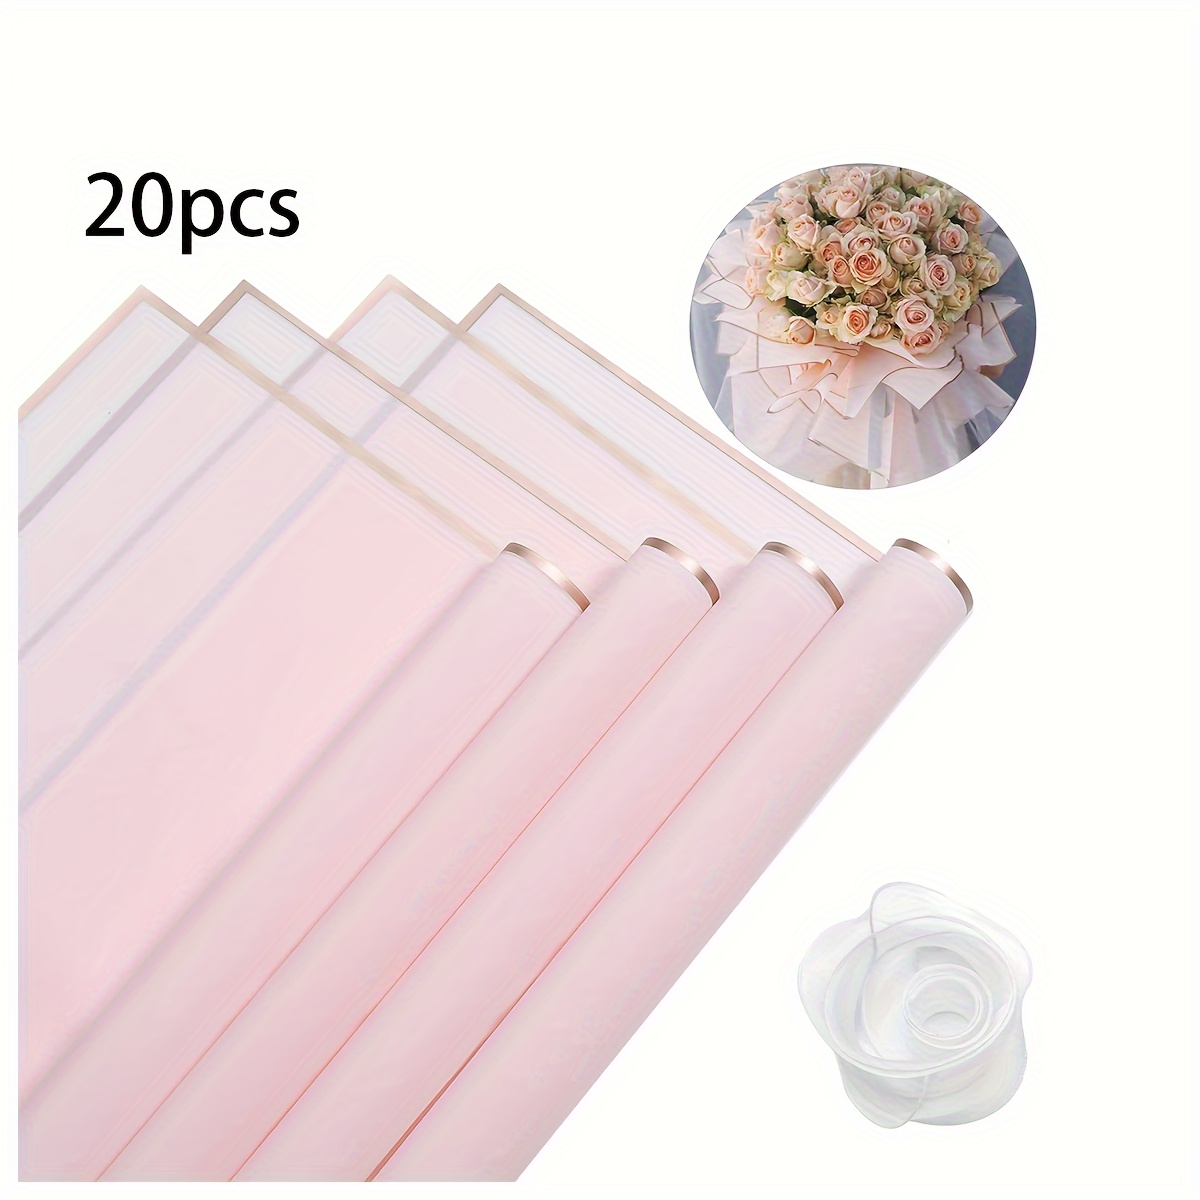 20pcs Simple Wrapping Paper Waterproof English Newspaper Flowers Wrapping  Paper Floral Materials